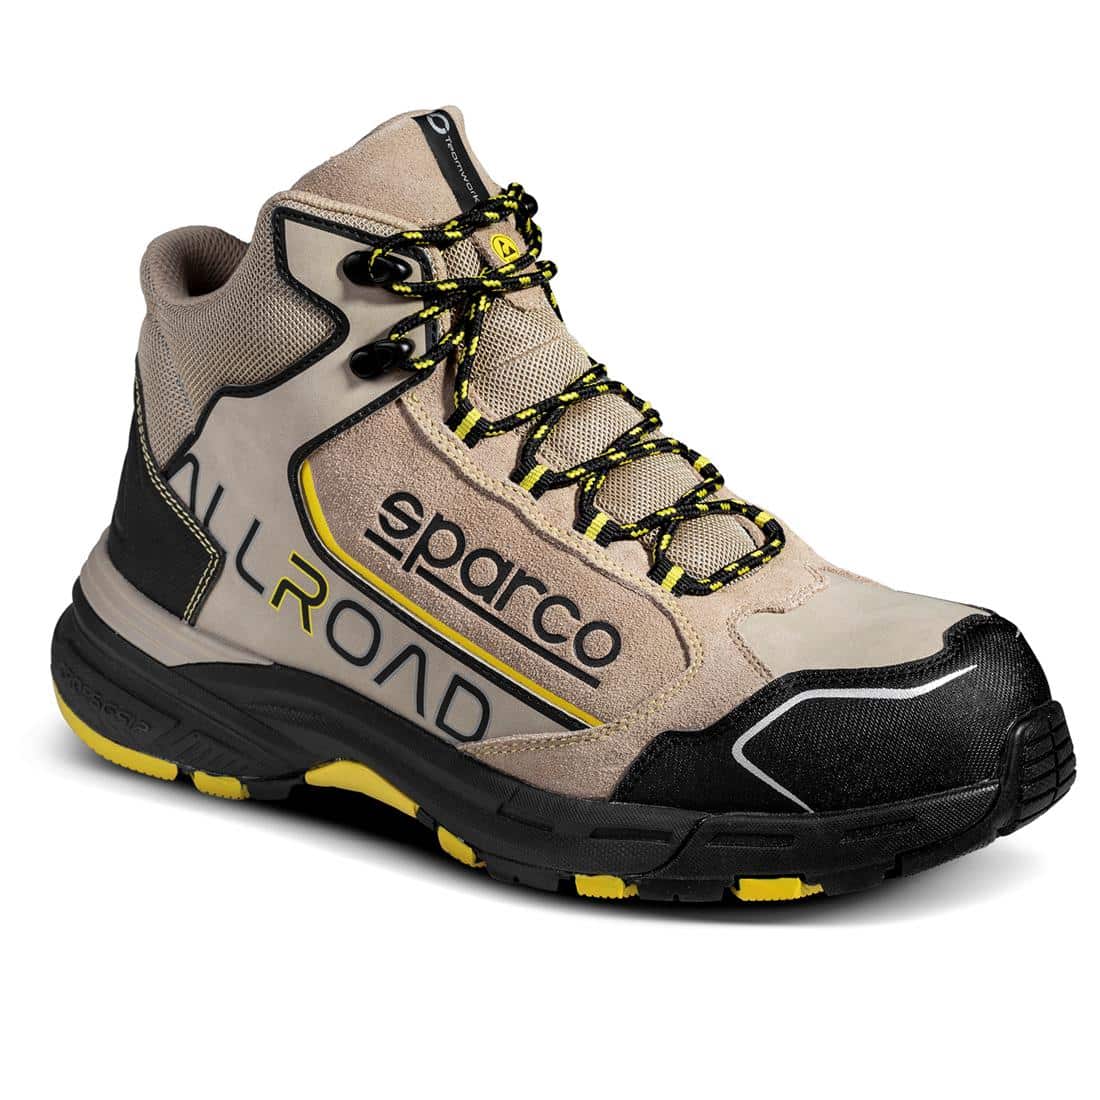 Bota Sparco All Road